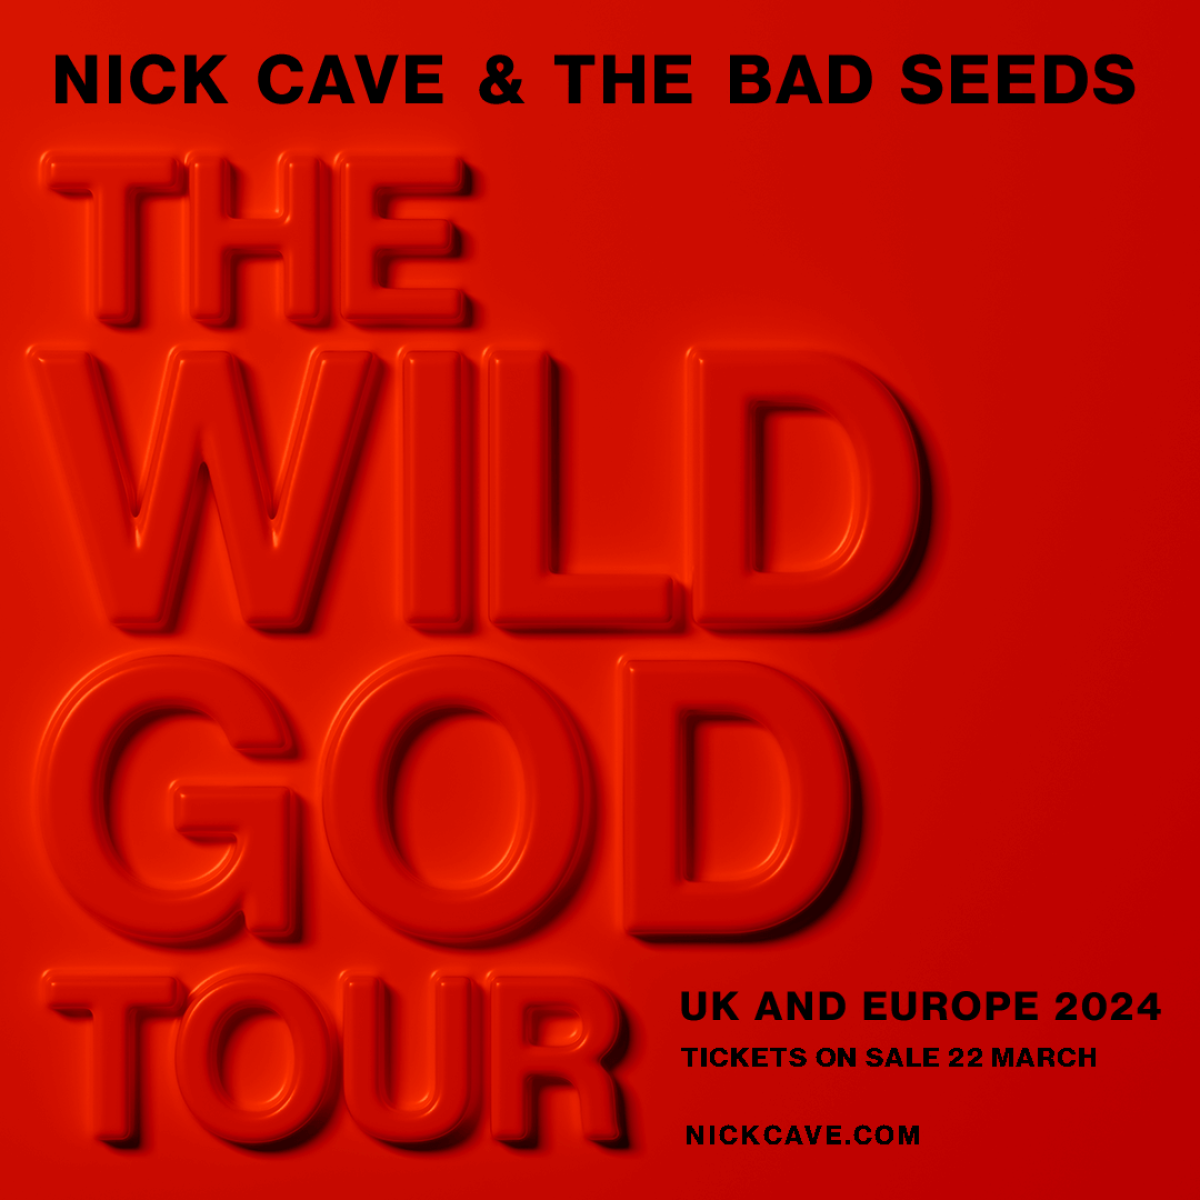 Nick Cave and the Bad Seeds - The Wild God Tour in der Olympiahalle München Tickets